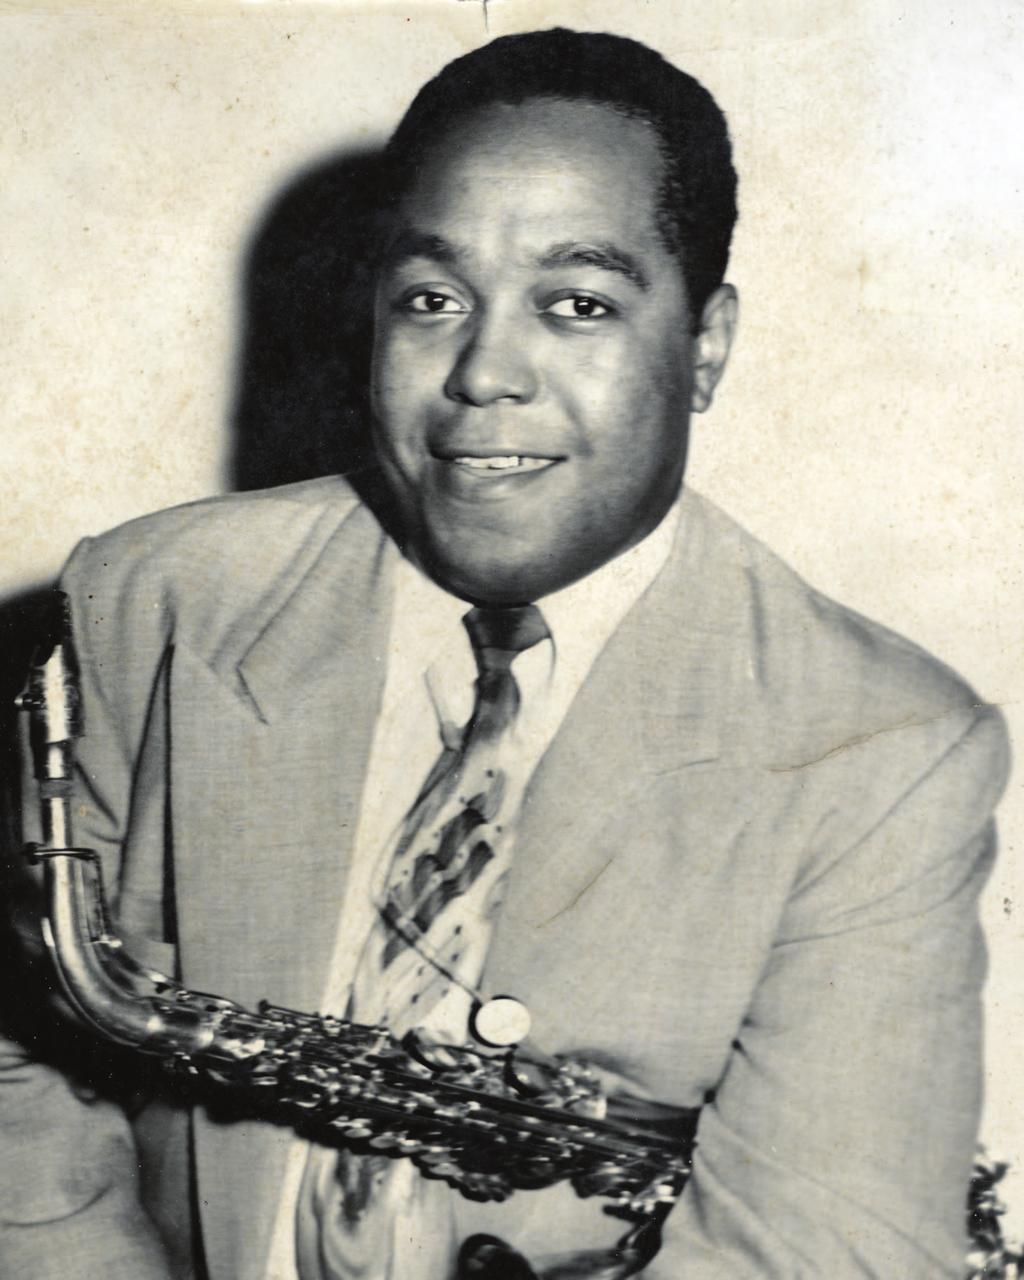 1 1 1 Charlie Parker 1-1 Musical giant Charlie Parker was a key creator of bebop, the jazz style marked by improvisation, quick tempos, and virtuosic technique.